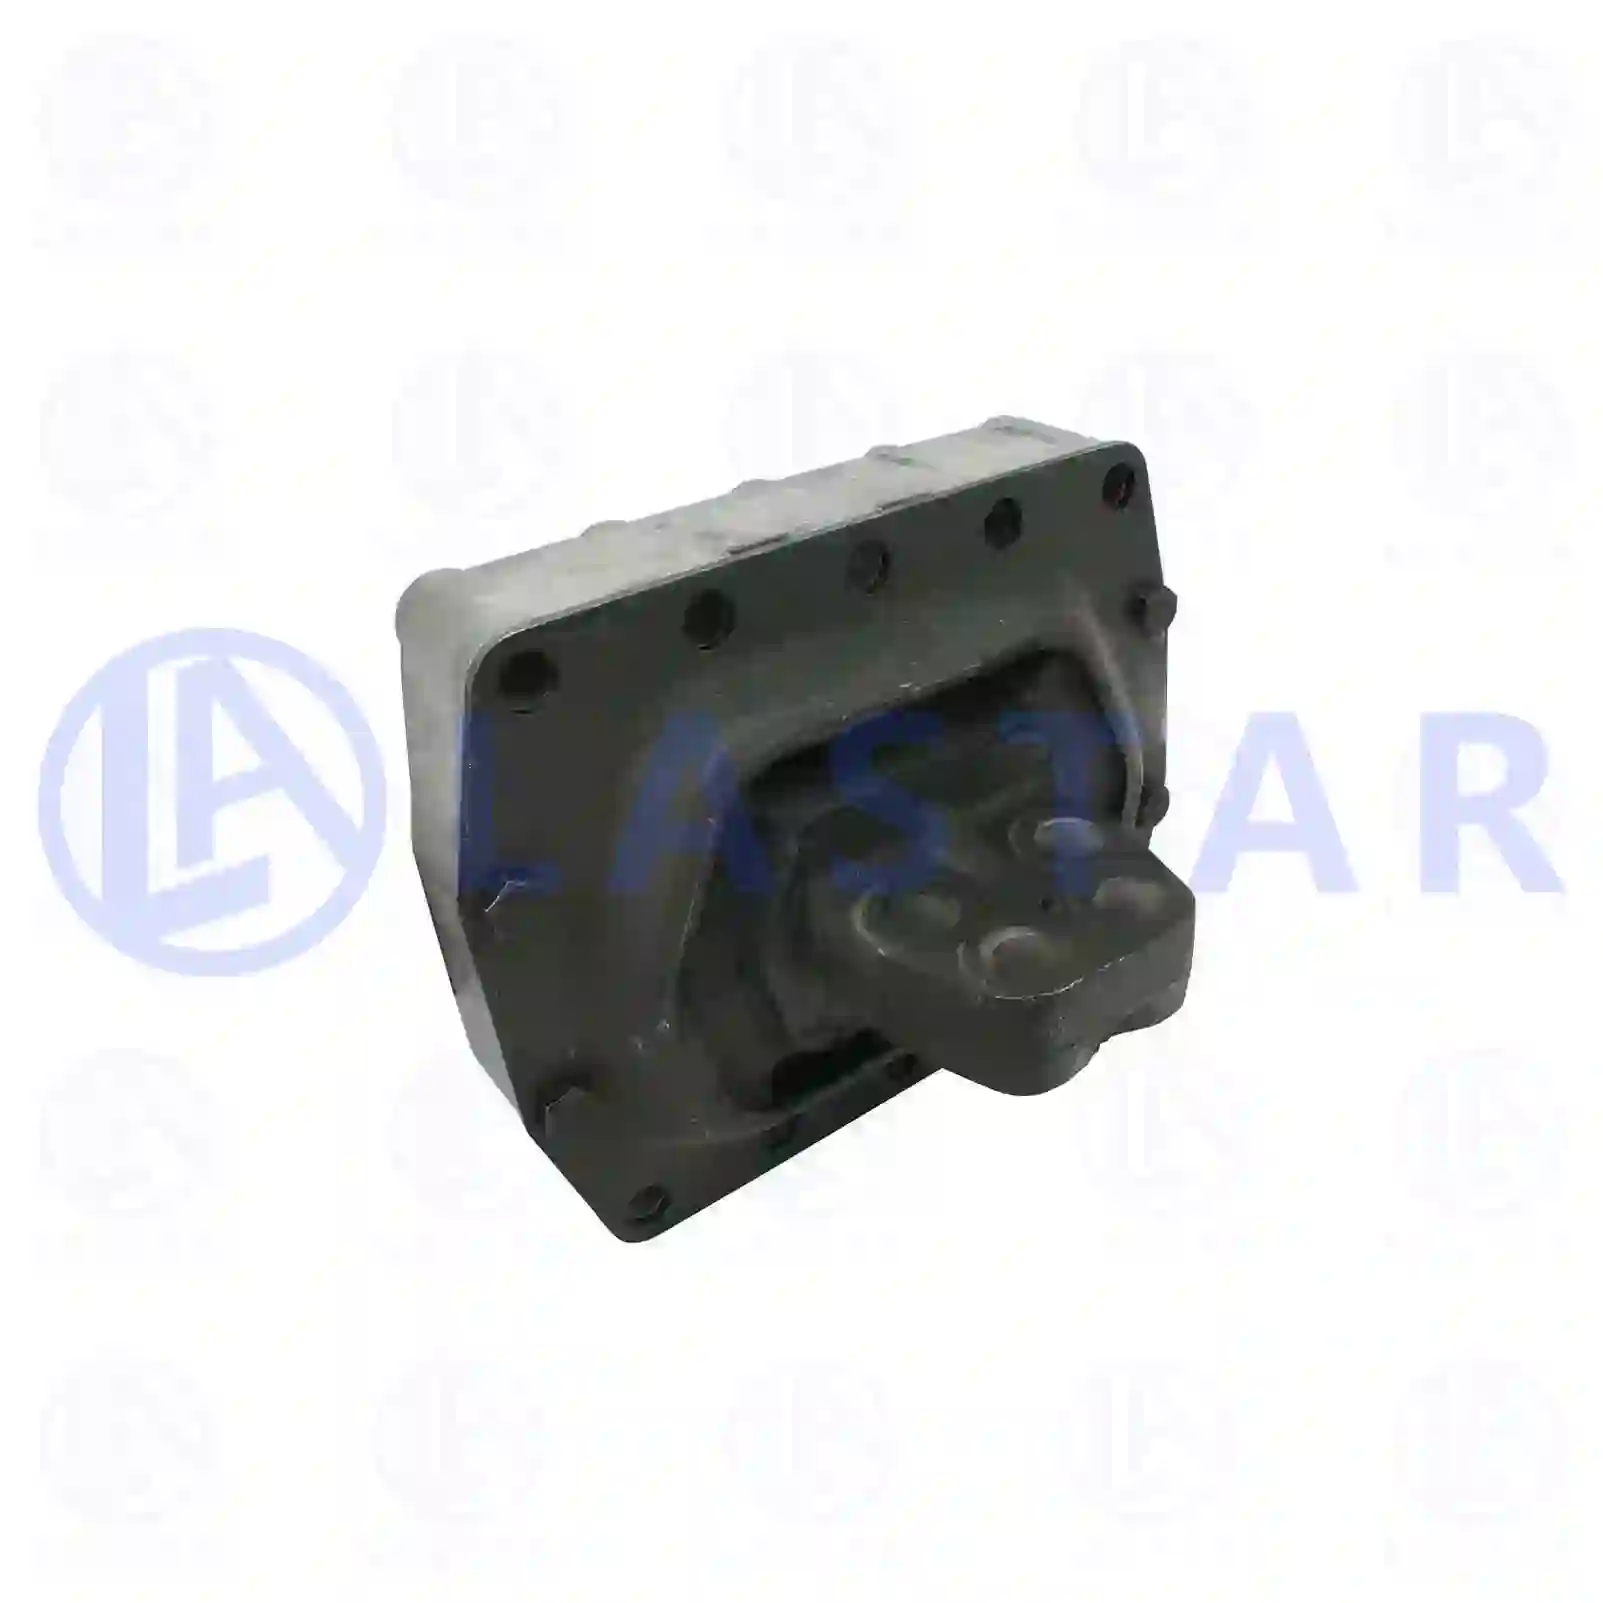 Engine mounting, rear, 77700060, 1629614 ||  77700060 Lastar Spare Part | Truck Spare Parts, Auotomotive Spare Parts Engine mounting, rear, 77700060, 1629614 ||  77700060 Lastar Spare Part | Truck Spare Parts, Auotomotive Spare Parts